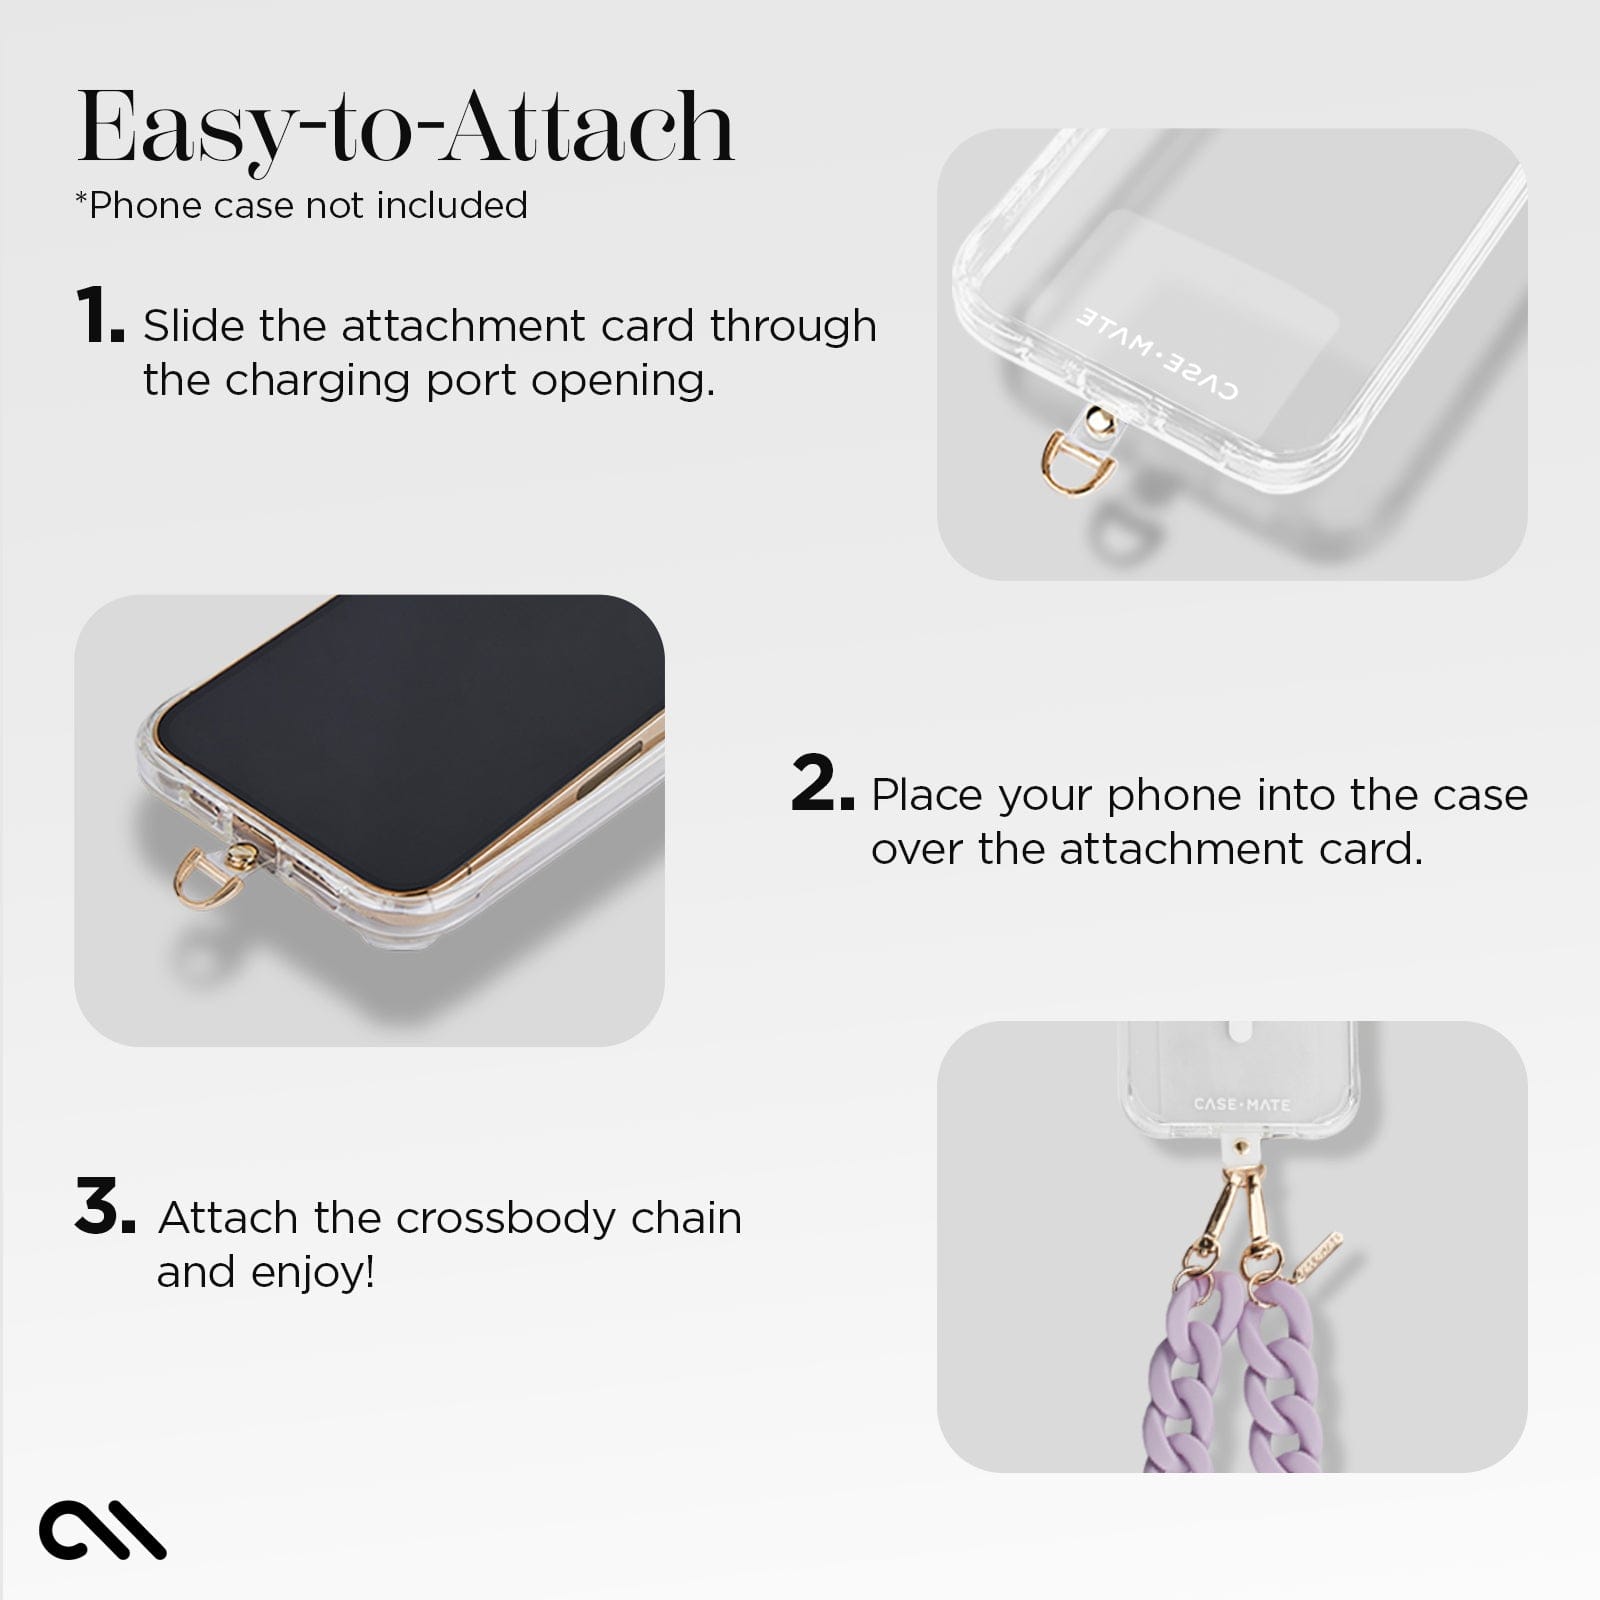 EASY TO ATTACH. *PHONE CASE NOT INCLUDED. 1. SLIDE THE ATTACHMENT CARD THROUGH THE CHARGING PORT OPENING. 2. PLACE YOUR PHONE INTO THE CASE OVER THE ATTACHMENT CARD. 3. ATTACH THE CROSSBODY CHAIN AND ENJOY